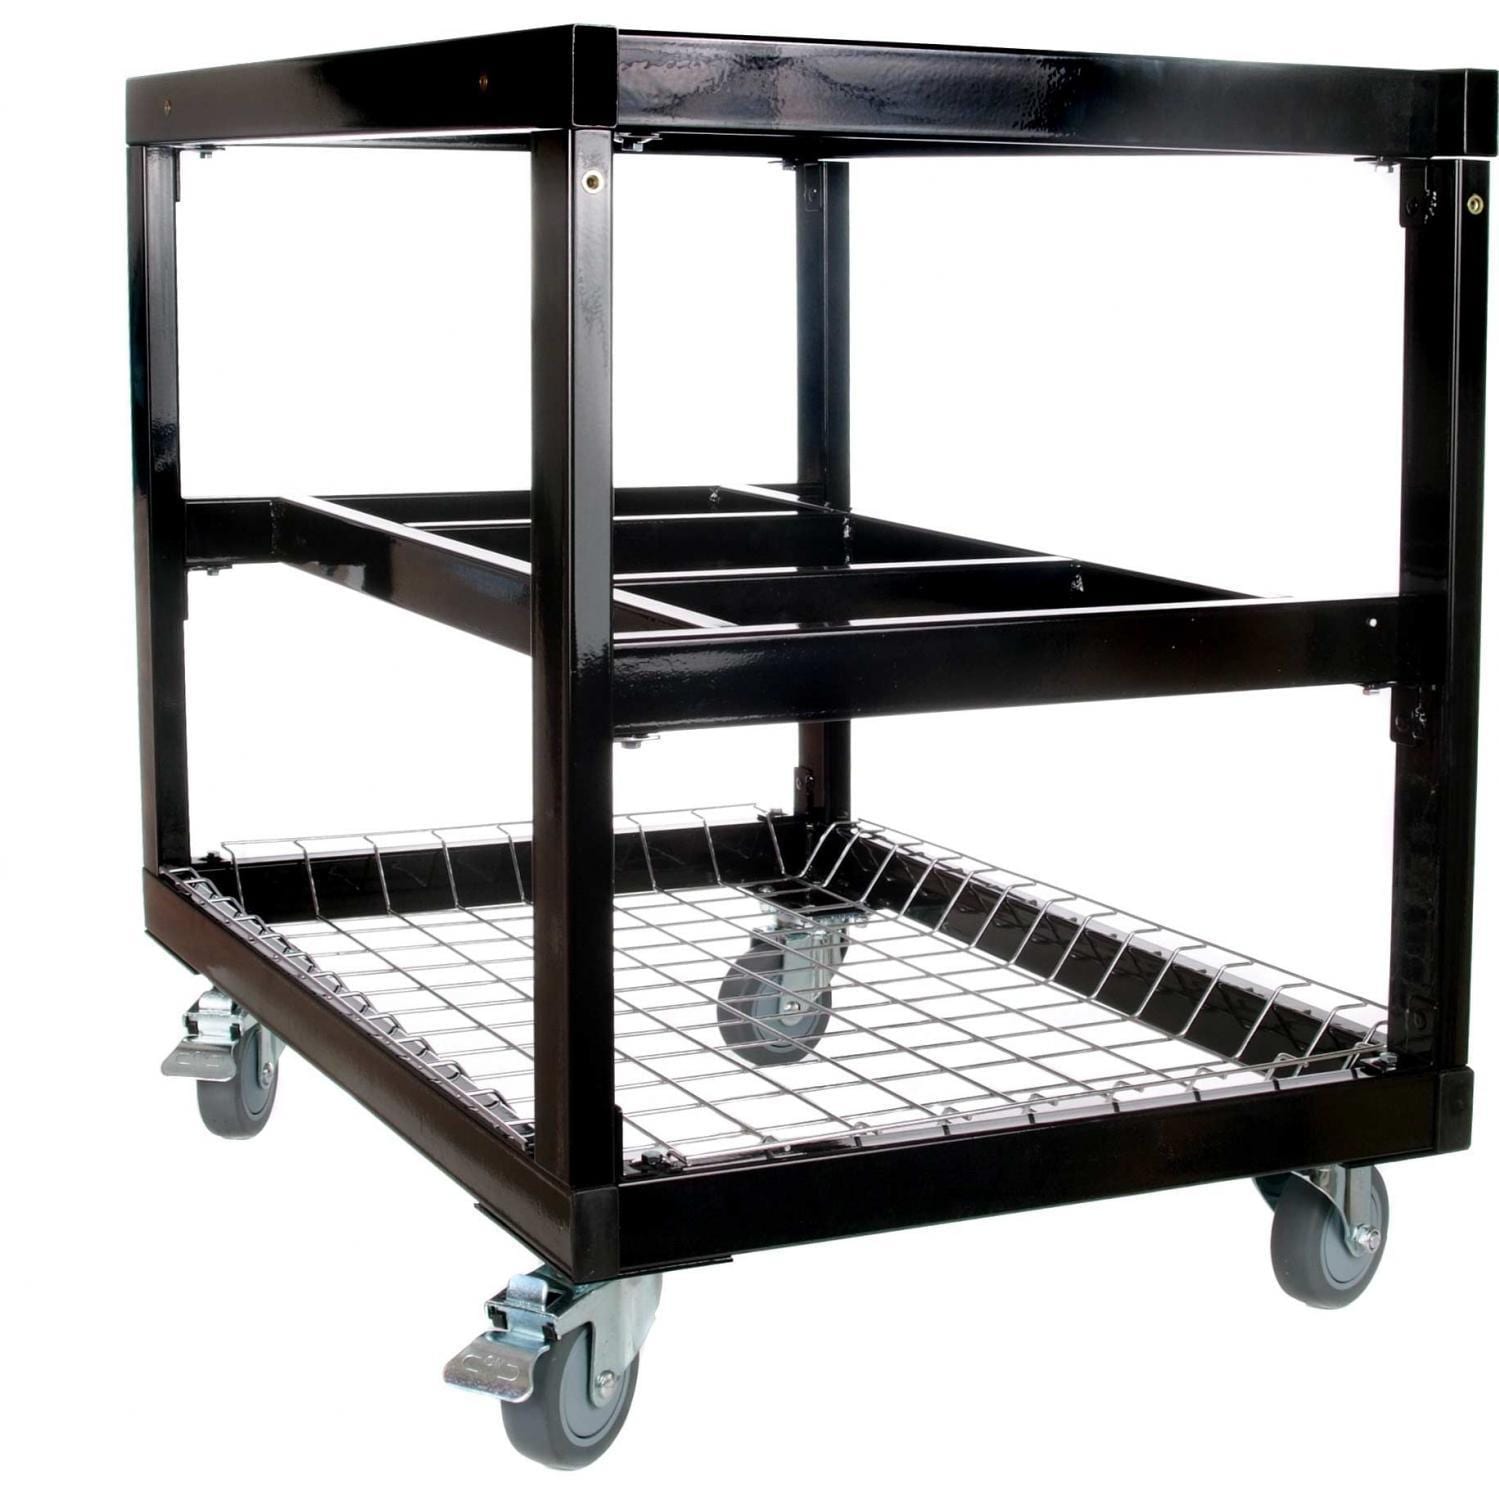 Primo Grills 368 Cart with Basket for Extra Large 400 & Oval Large 300 Grills - image 2 of 5